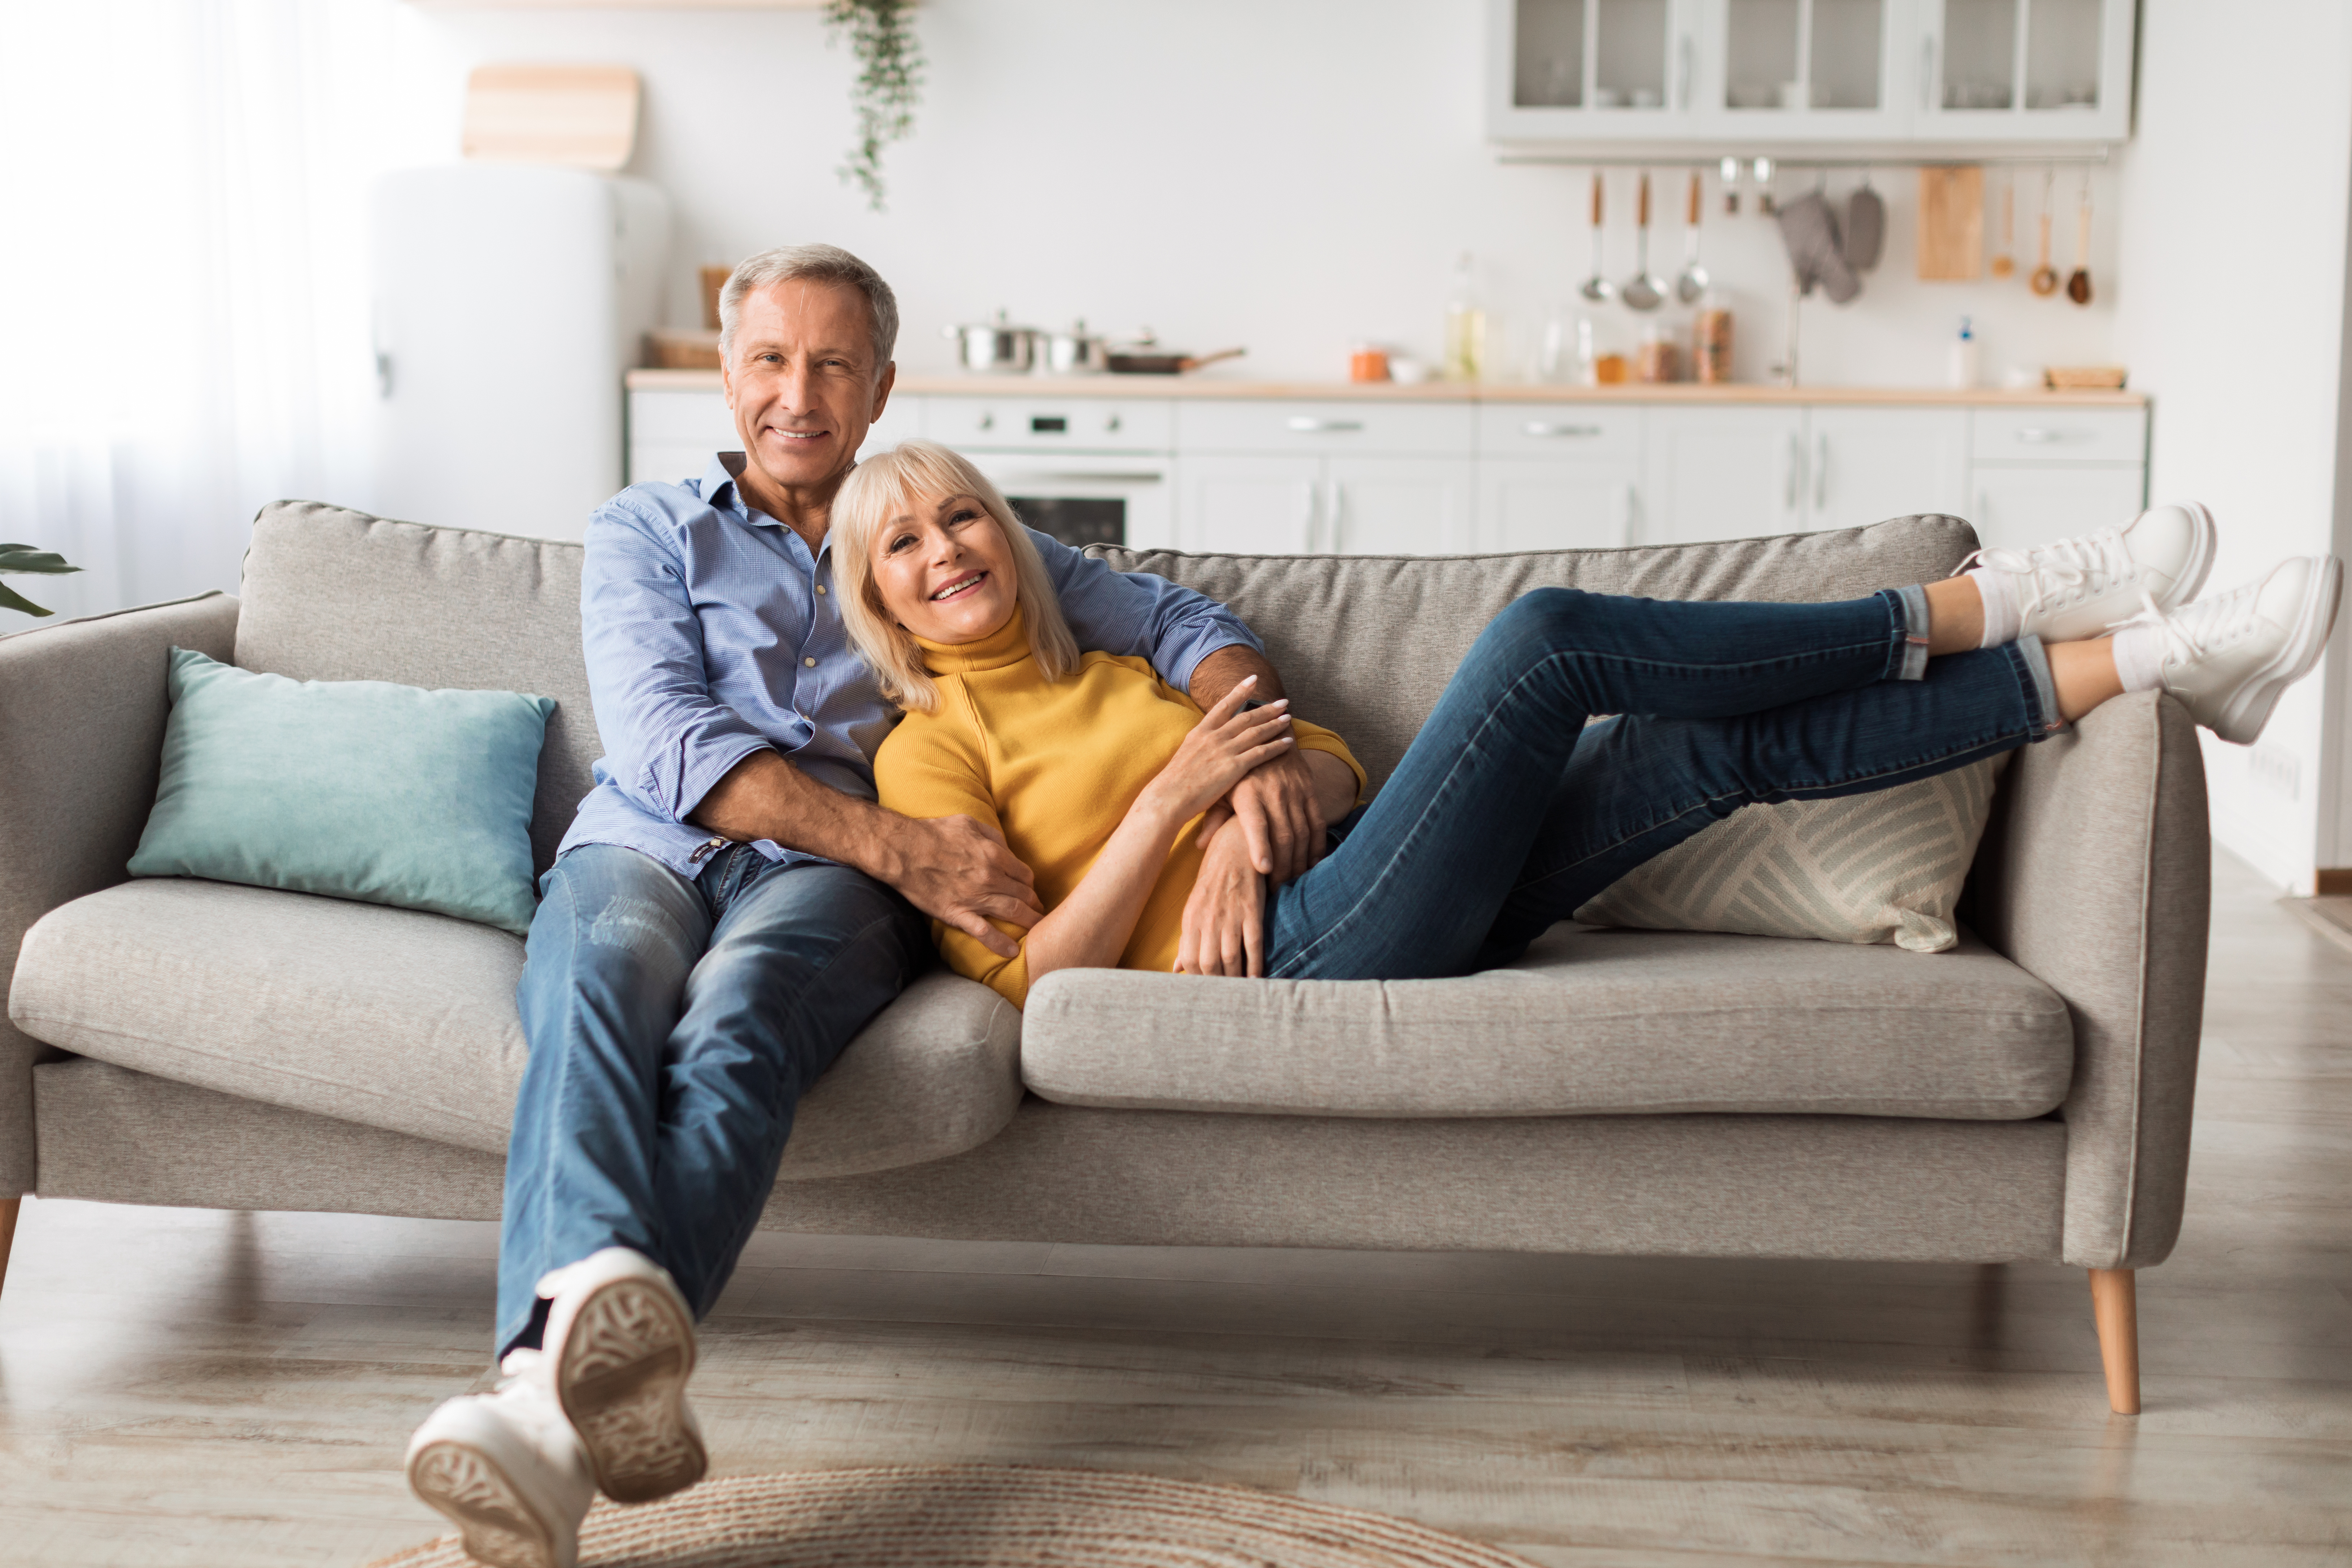 Mature Spouses Hugging Sitting On Sofa Together At Home, Smiling To Camera. Happy Senior Husband And Wife Embracing Relaxing On Couch On Weekend. Retirement Lifestyle And Happiness In Marriage